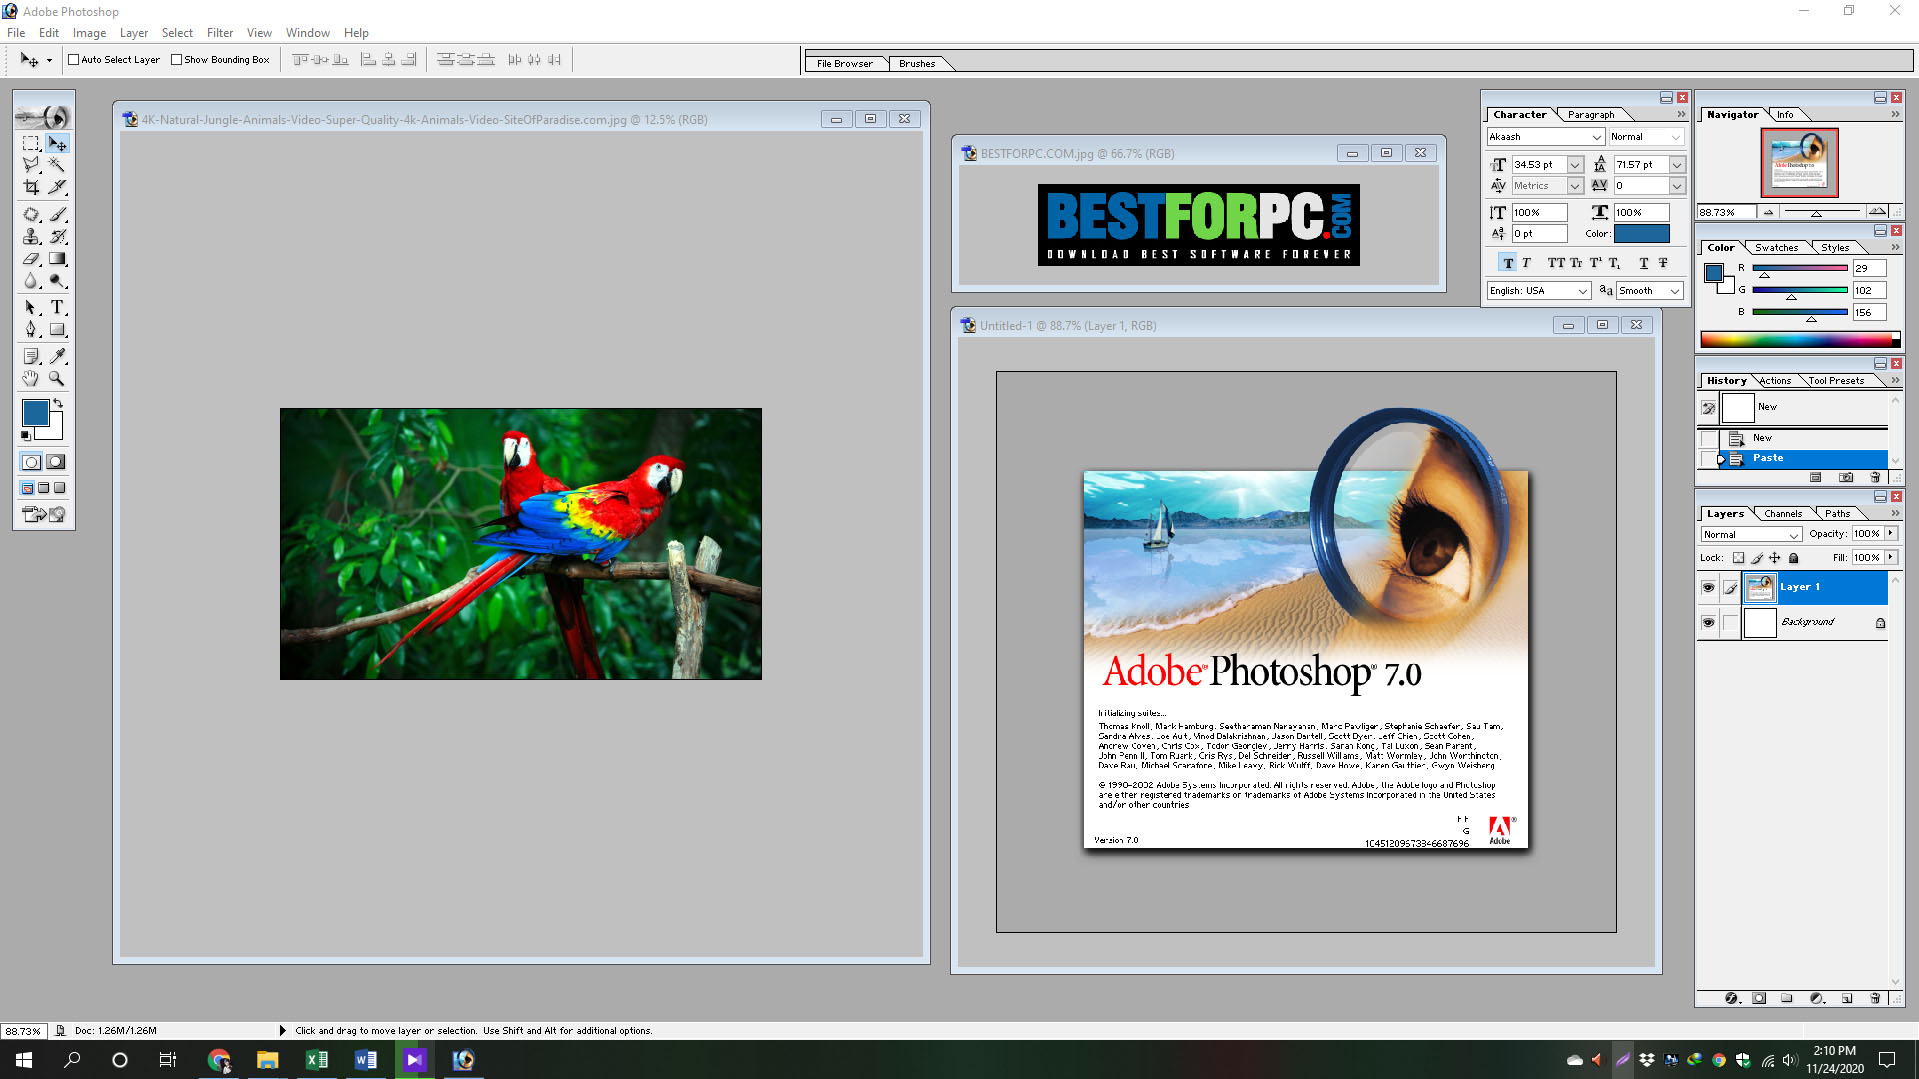 Adobe photoshop software free download latest version for windows 7 creo software free download full version with crack